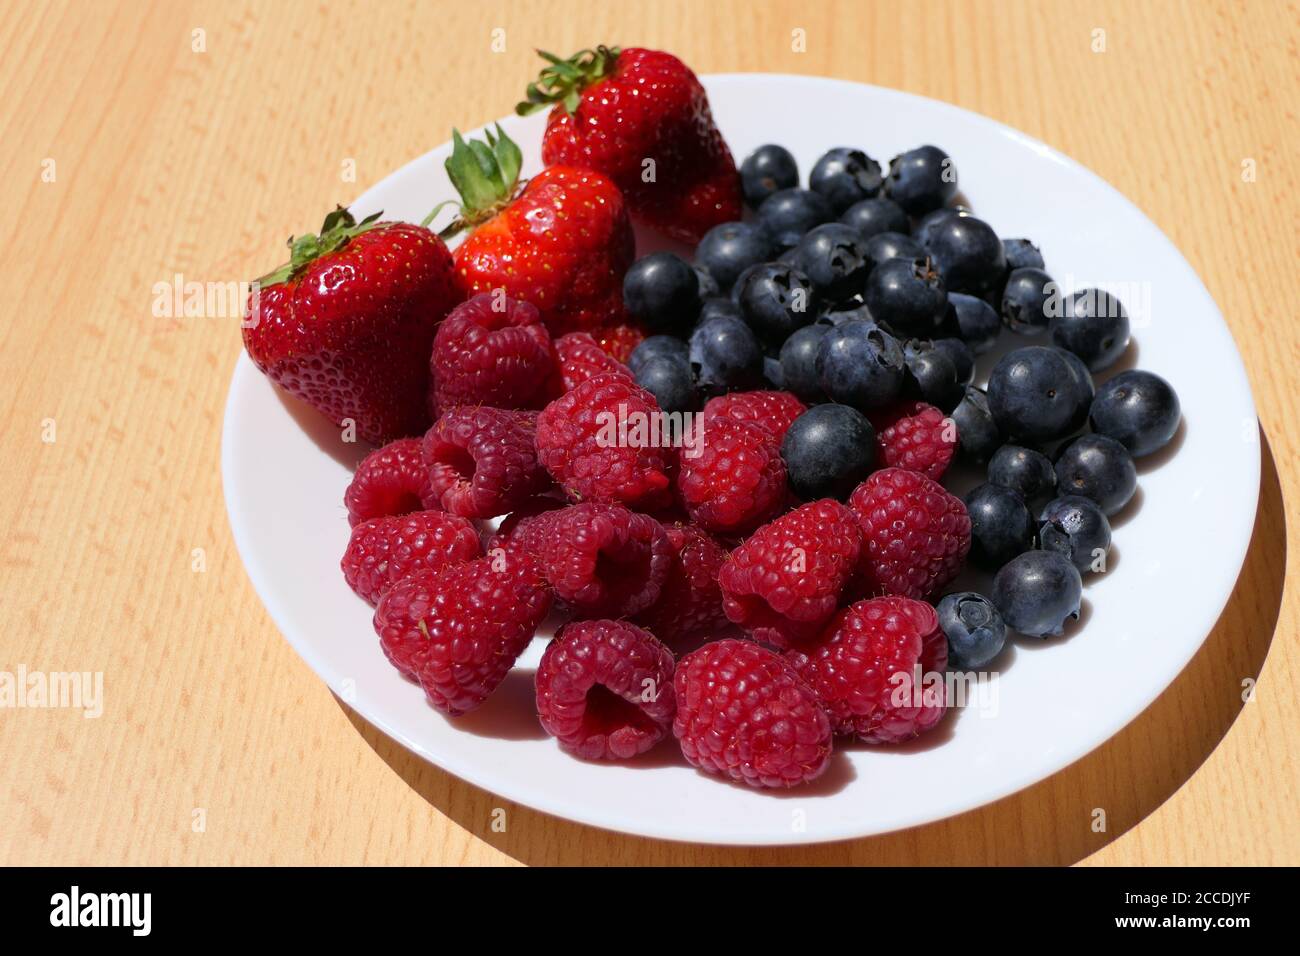 White plate with mixed berries including strawberries, raspberries and blueberries on a wooden table Stock Photo